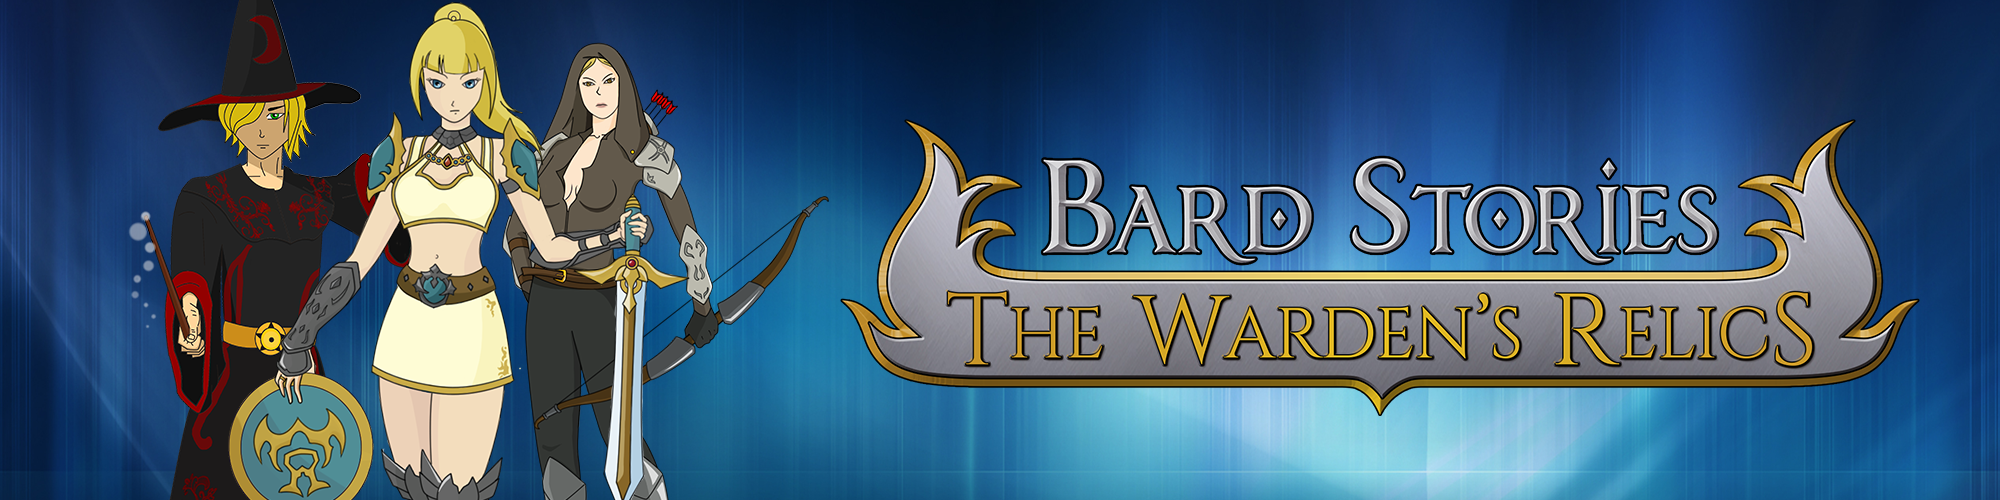 Bard Stories - The Warden's Relics